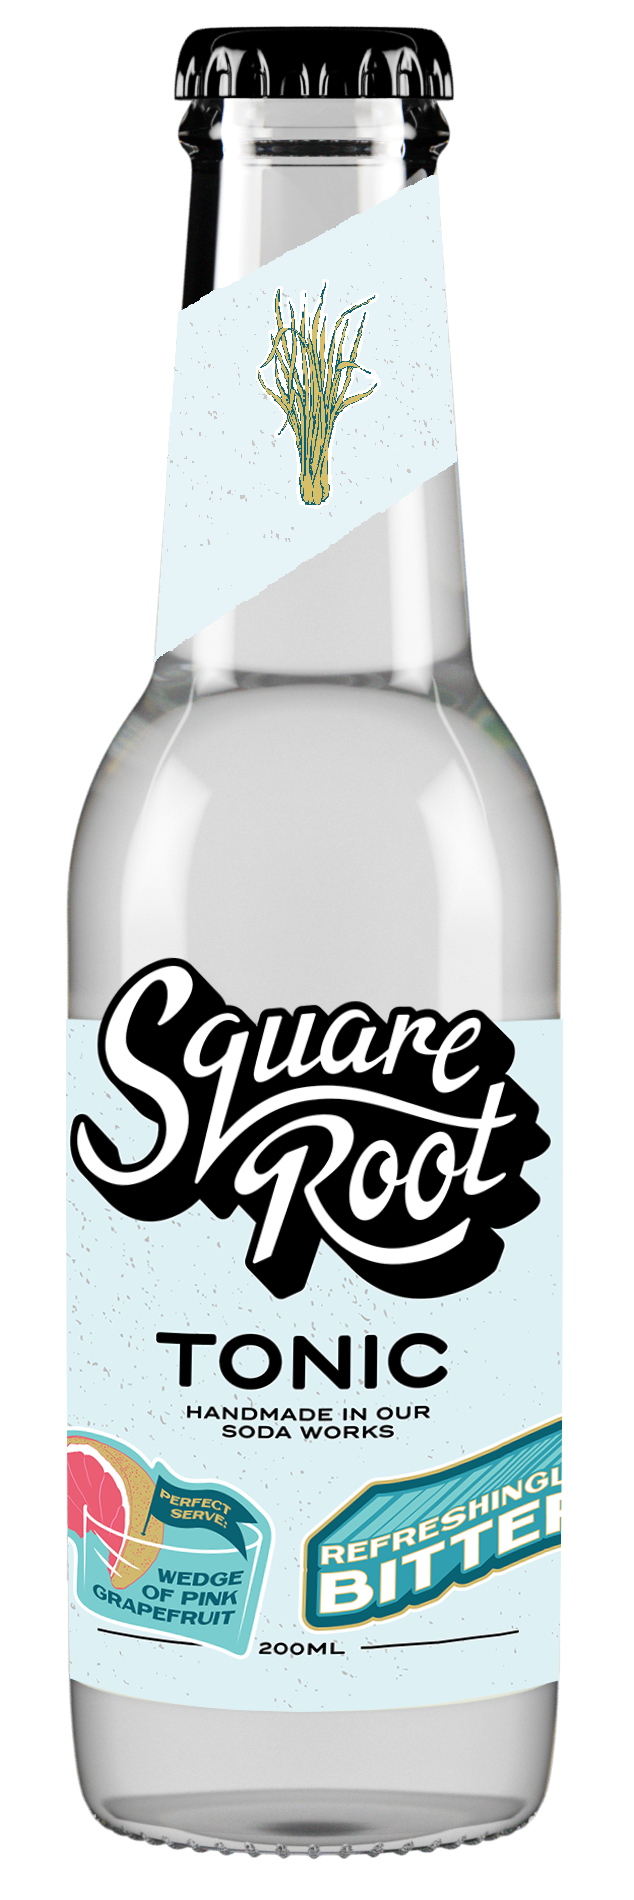 ALL THINGS DRINKS - Square Root Tonic